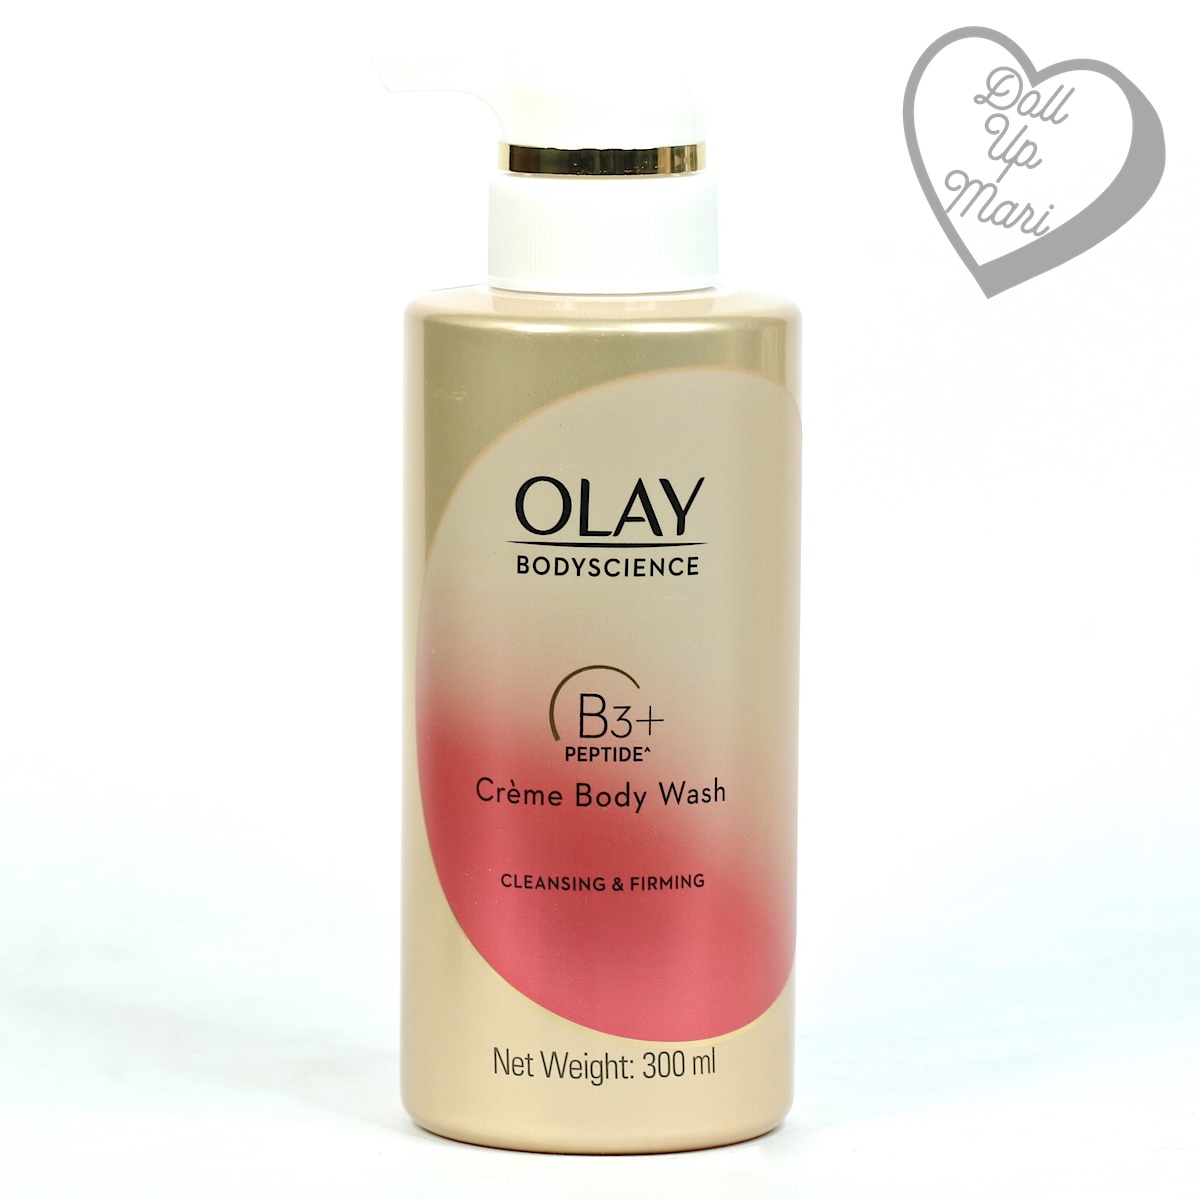 Olay BodyScience Crème Body Wash Cleansing and Firming with Peptide Pack Shot